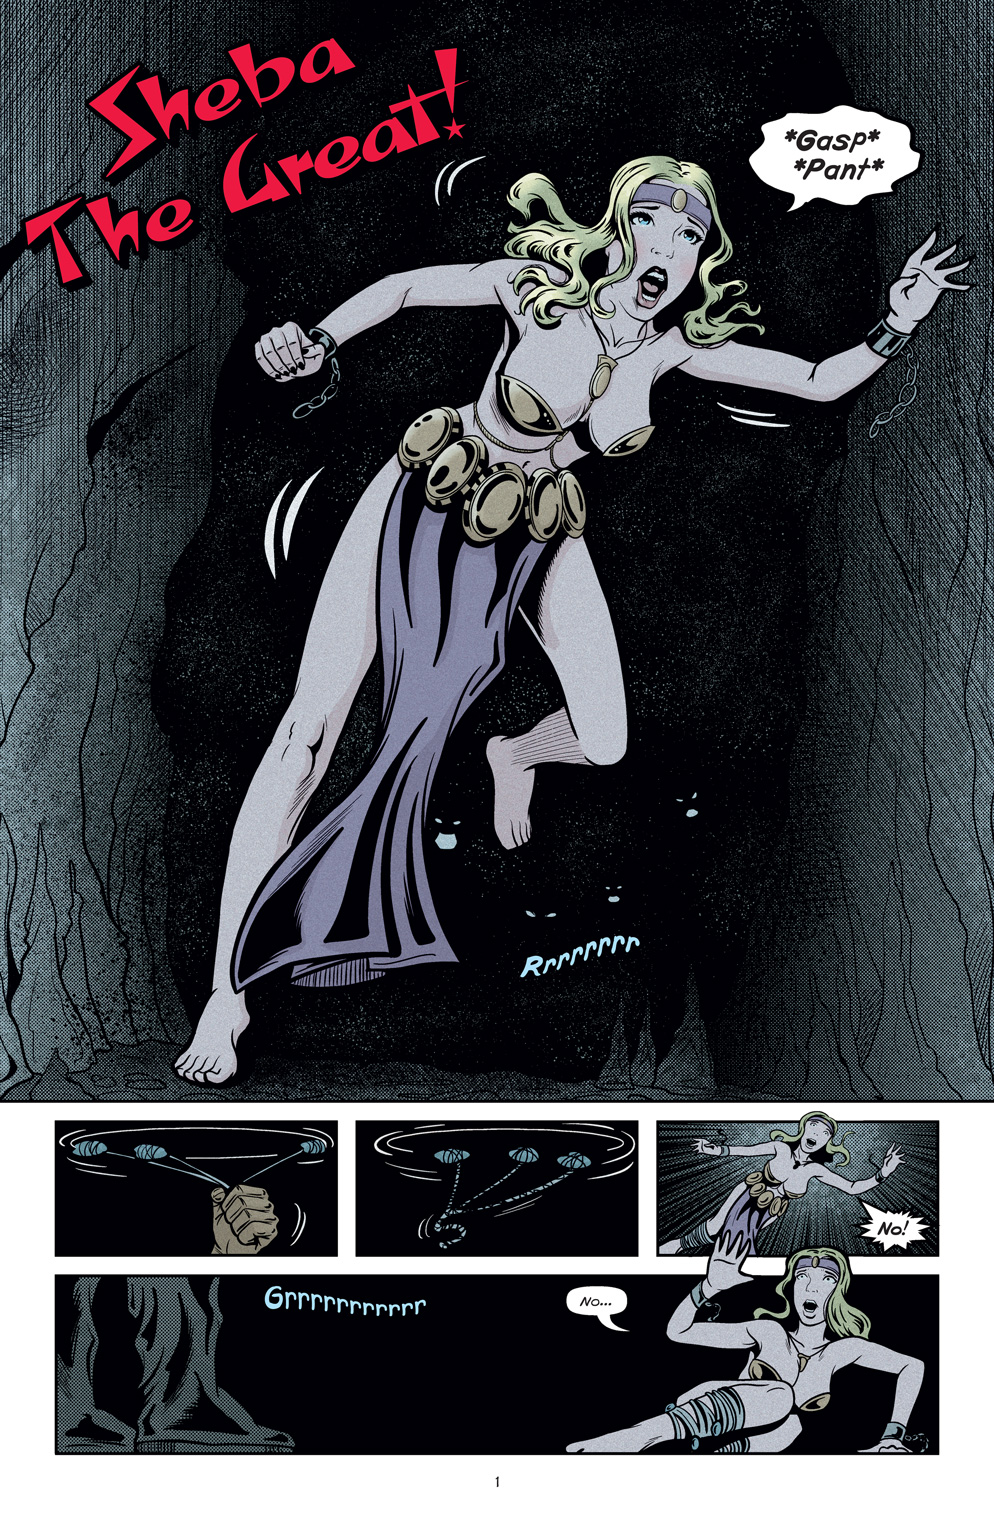 Page 1 of the short comic book story 'Sheba the Great' written and illustrated by Von Allan